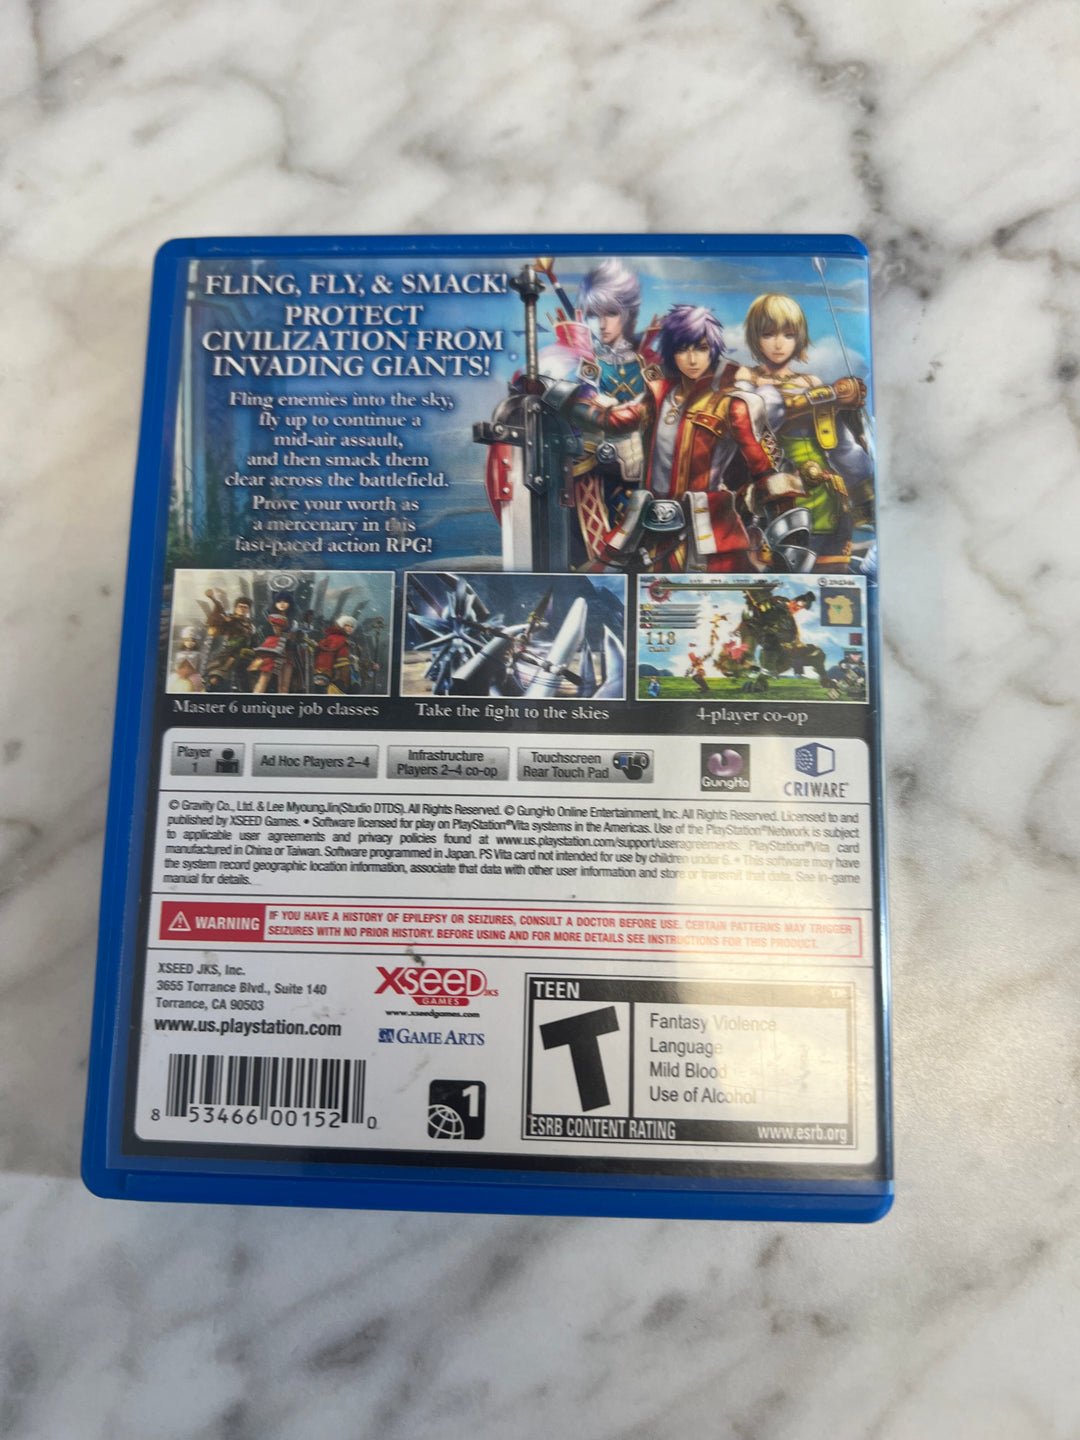 Ragnarok Odyssey for PS VITA Case and inserts only